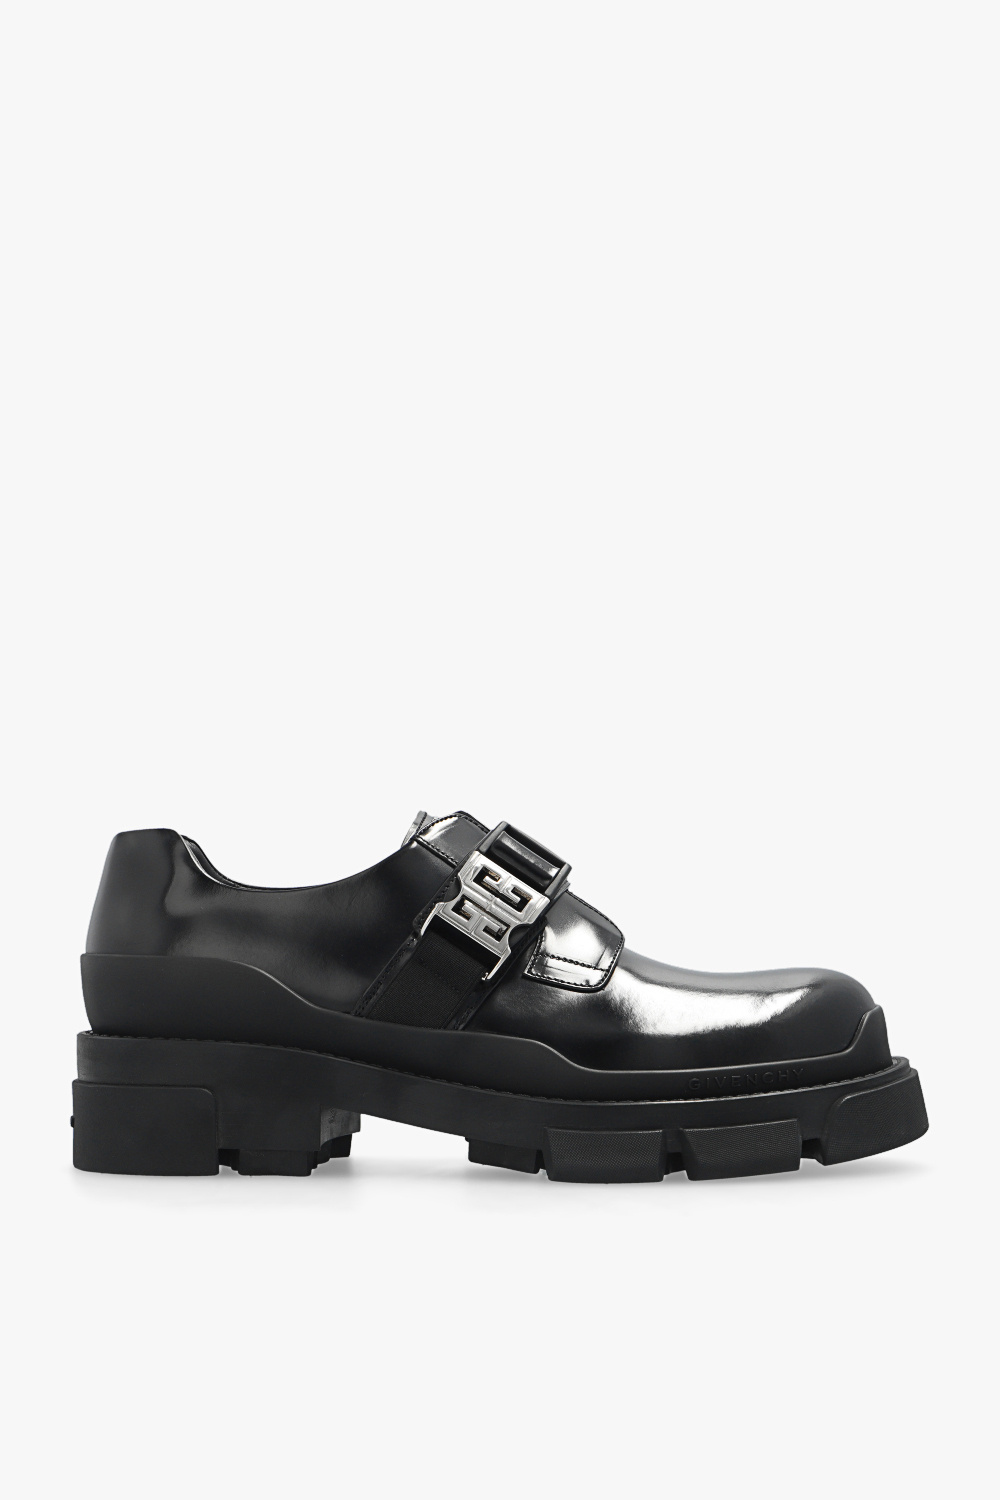 Givenchy ‘Terra’ derby Yung-96 shoes